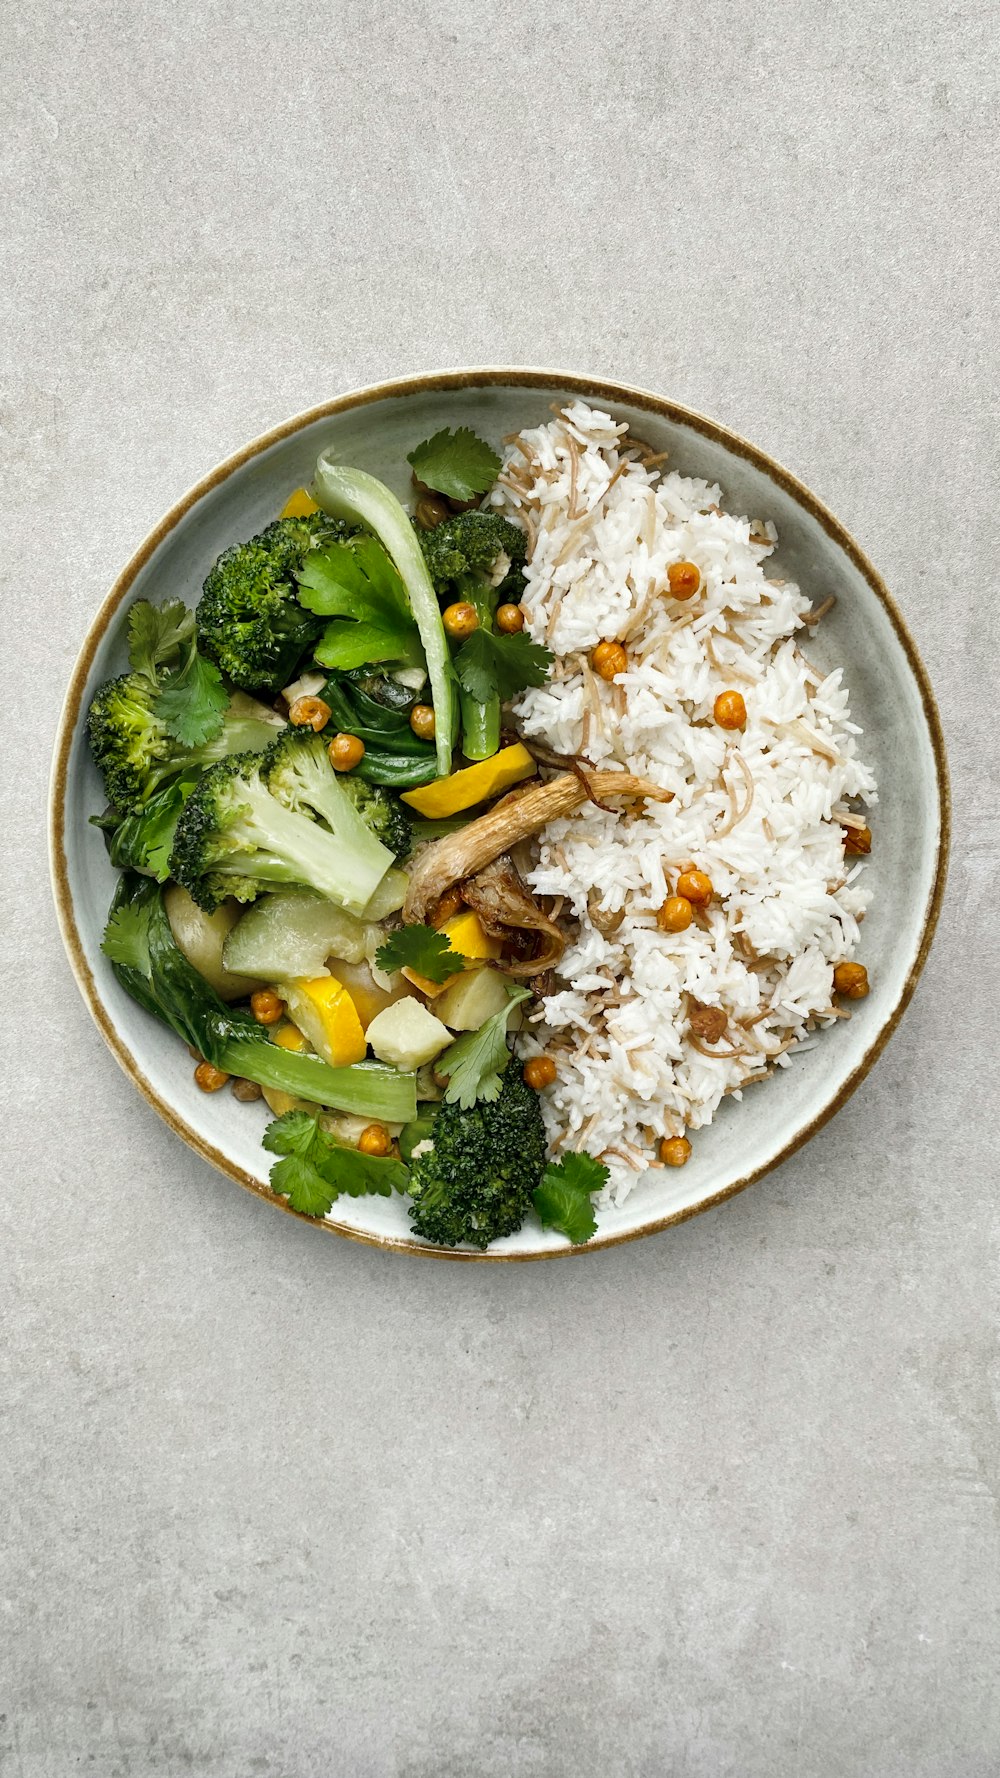 a plate of rice, broccoli, and other vegetables